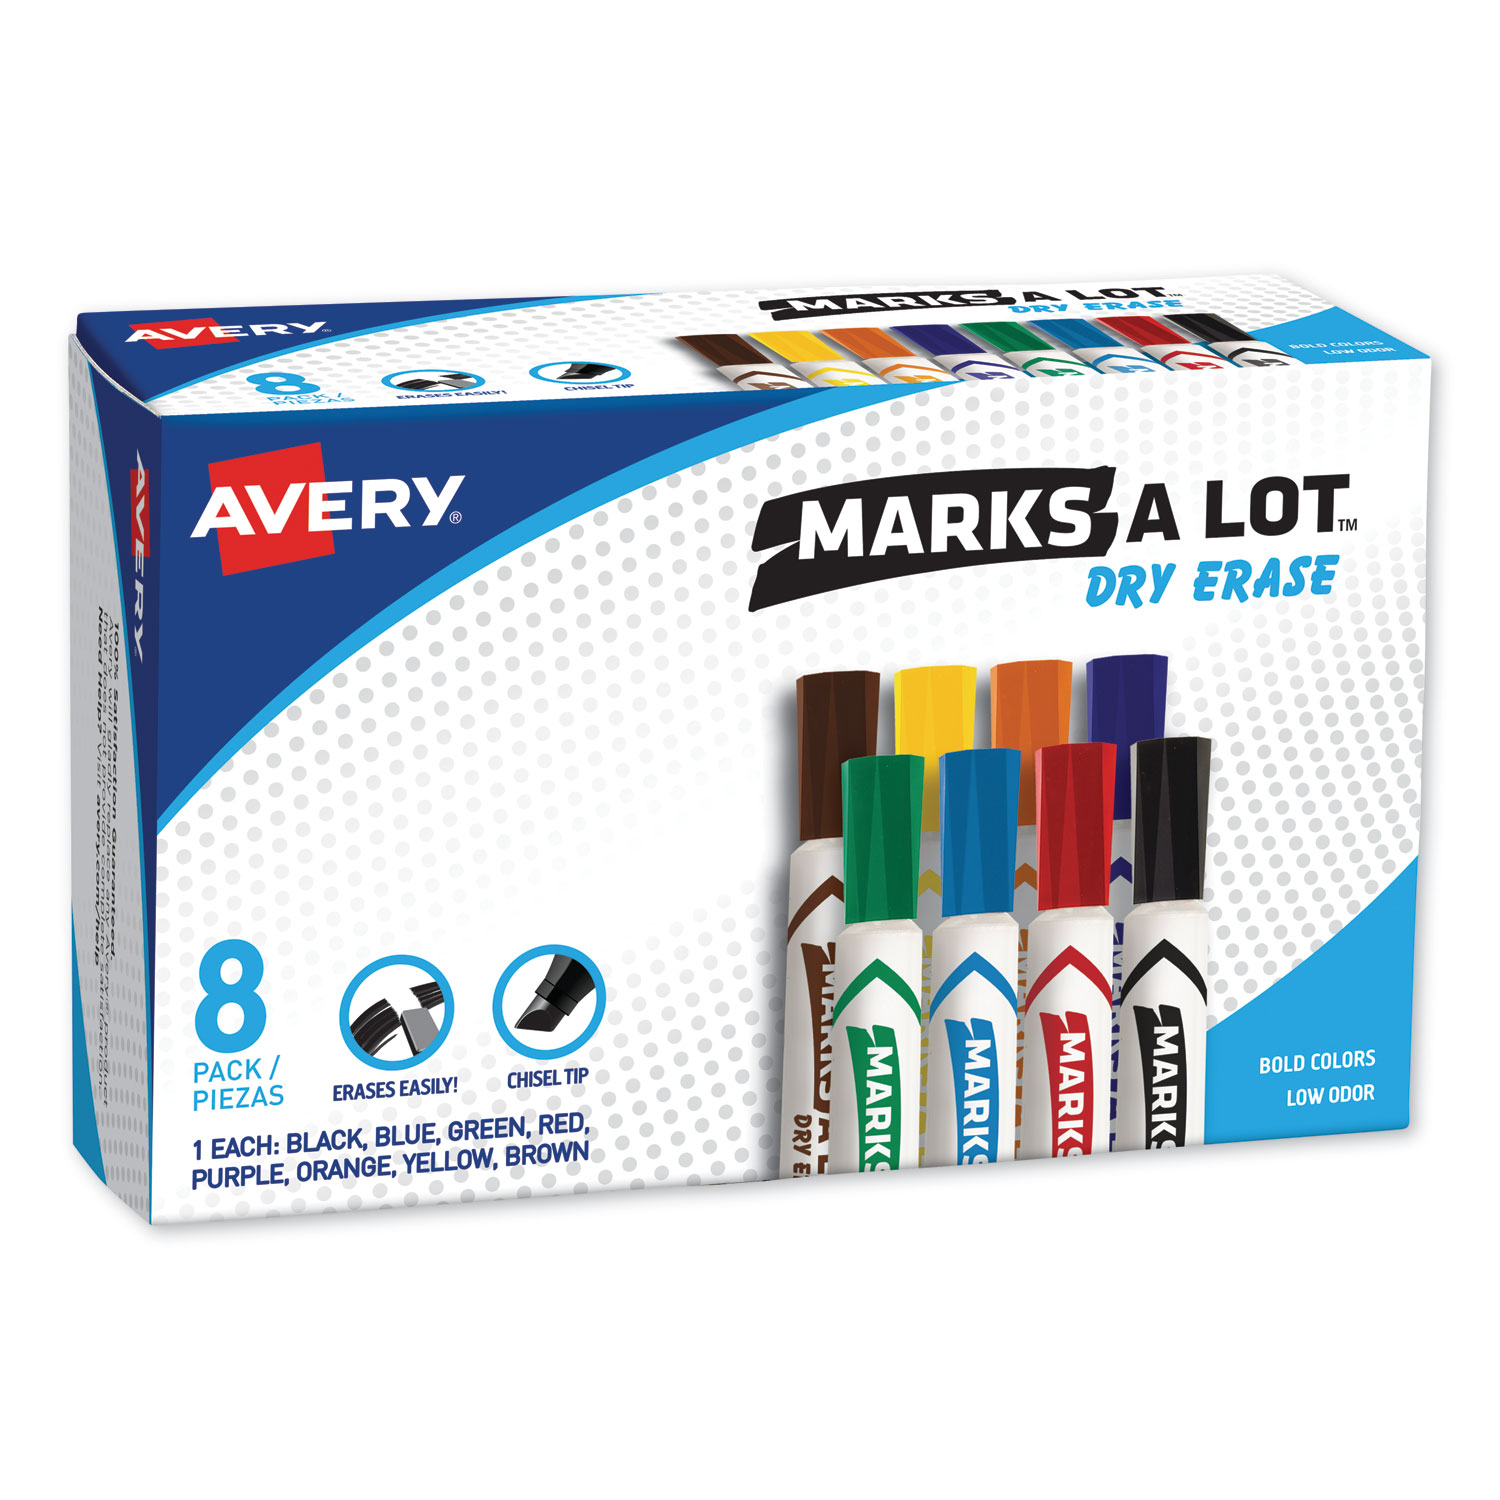  Avery 24411 MARKS A LOT Desk-Style Dry Erase Marker, Broad Chisel Tip, Assorted Colors, 8/Set (AVE24411) 